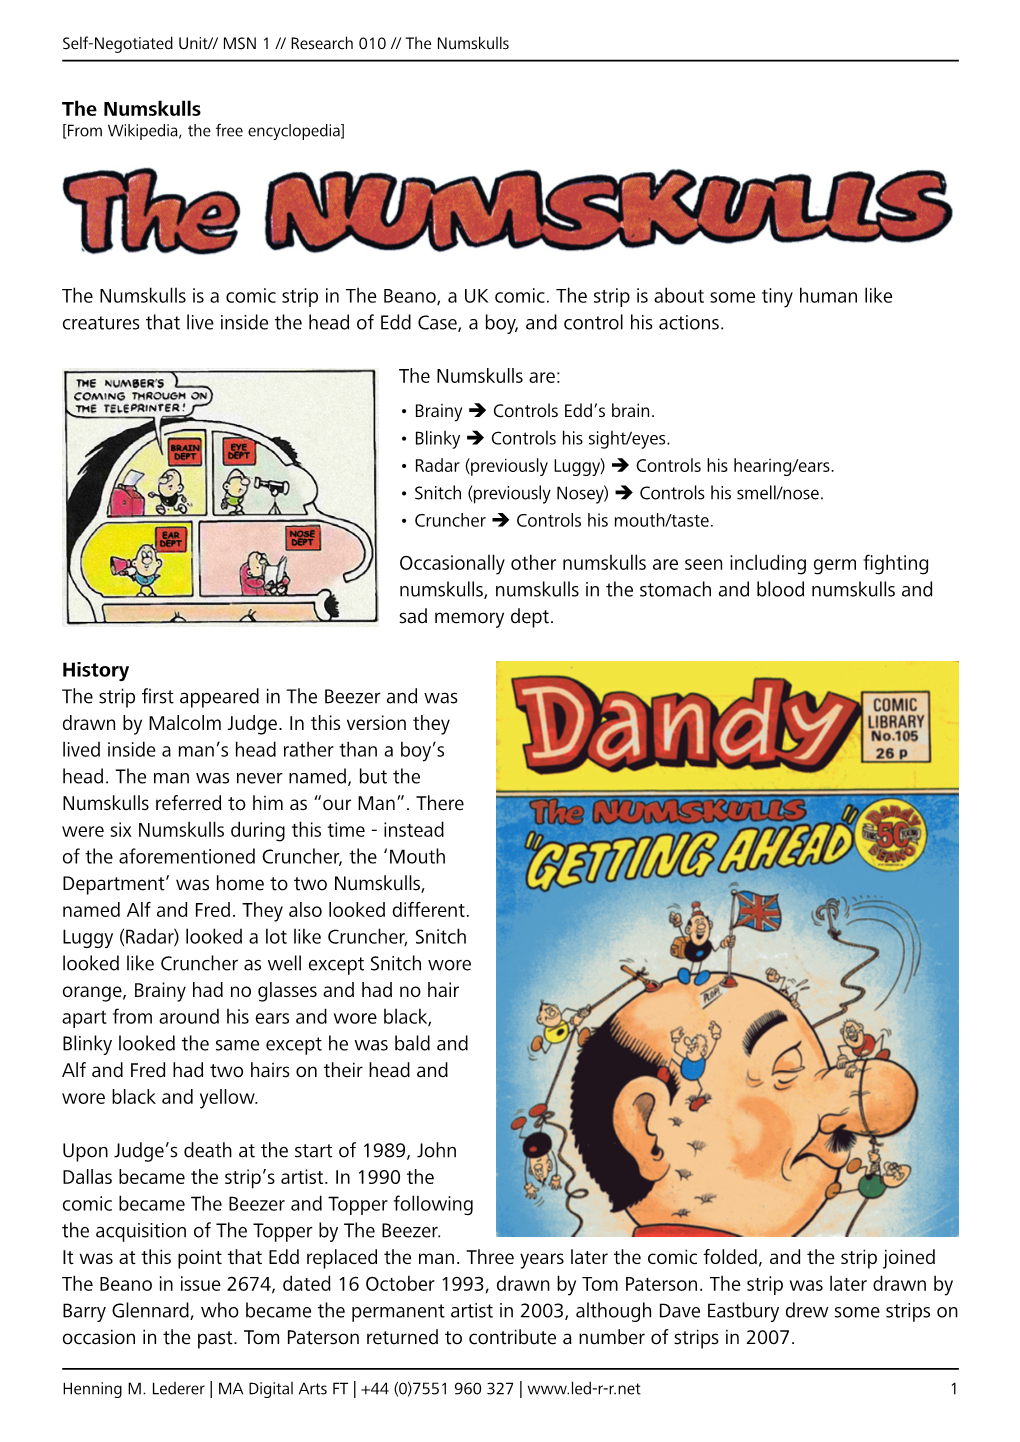 The Numskulls the Numskulls Is a Comic Strip in the Beano, a UK